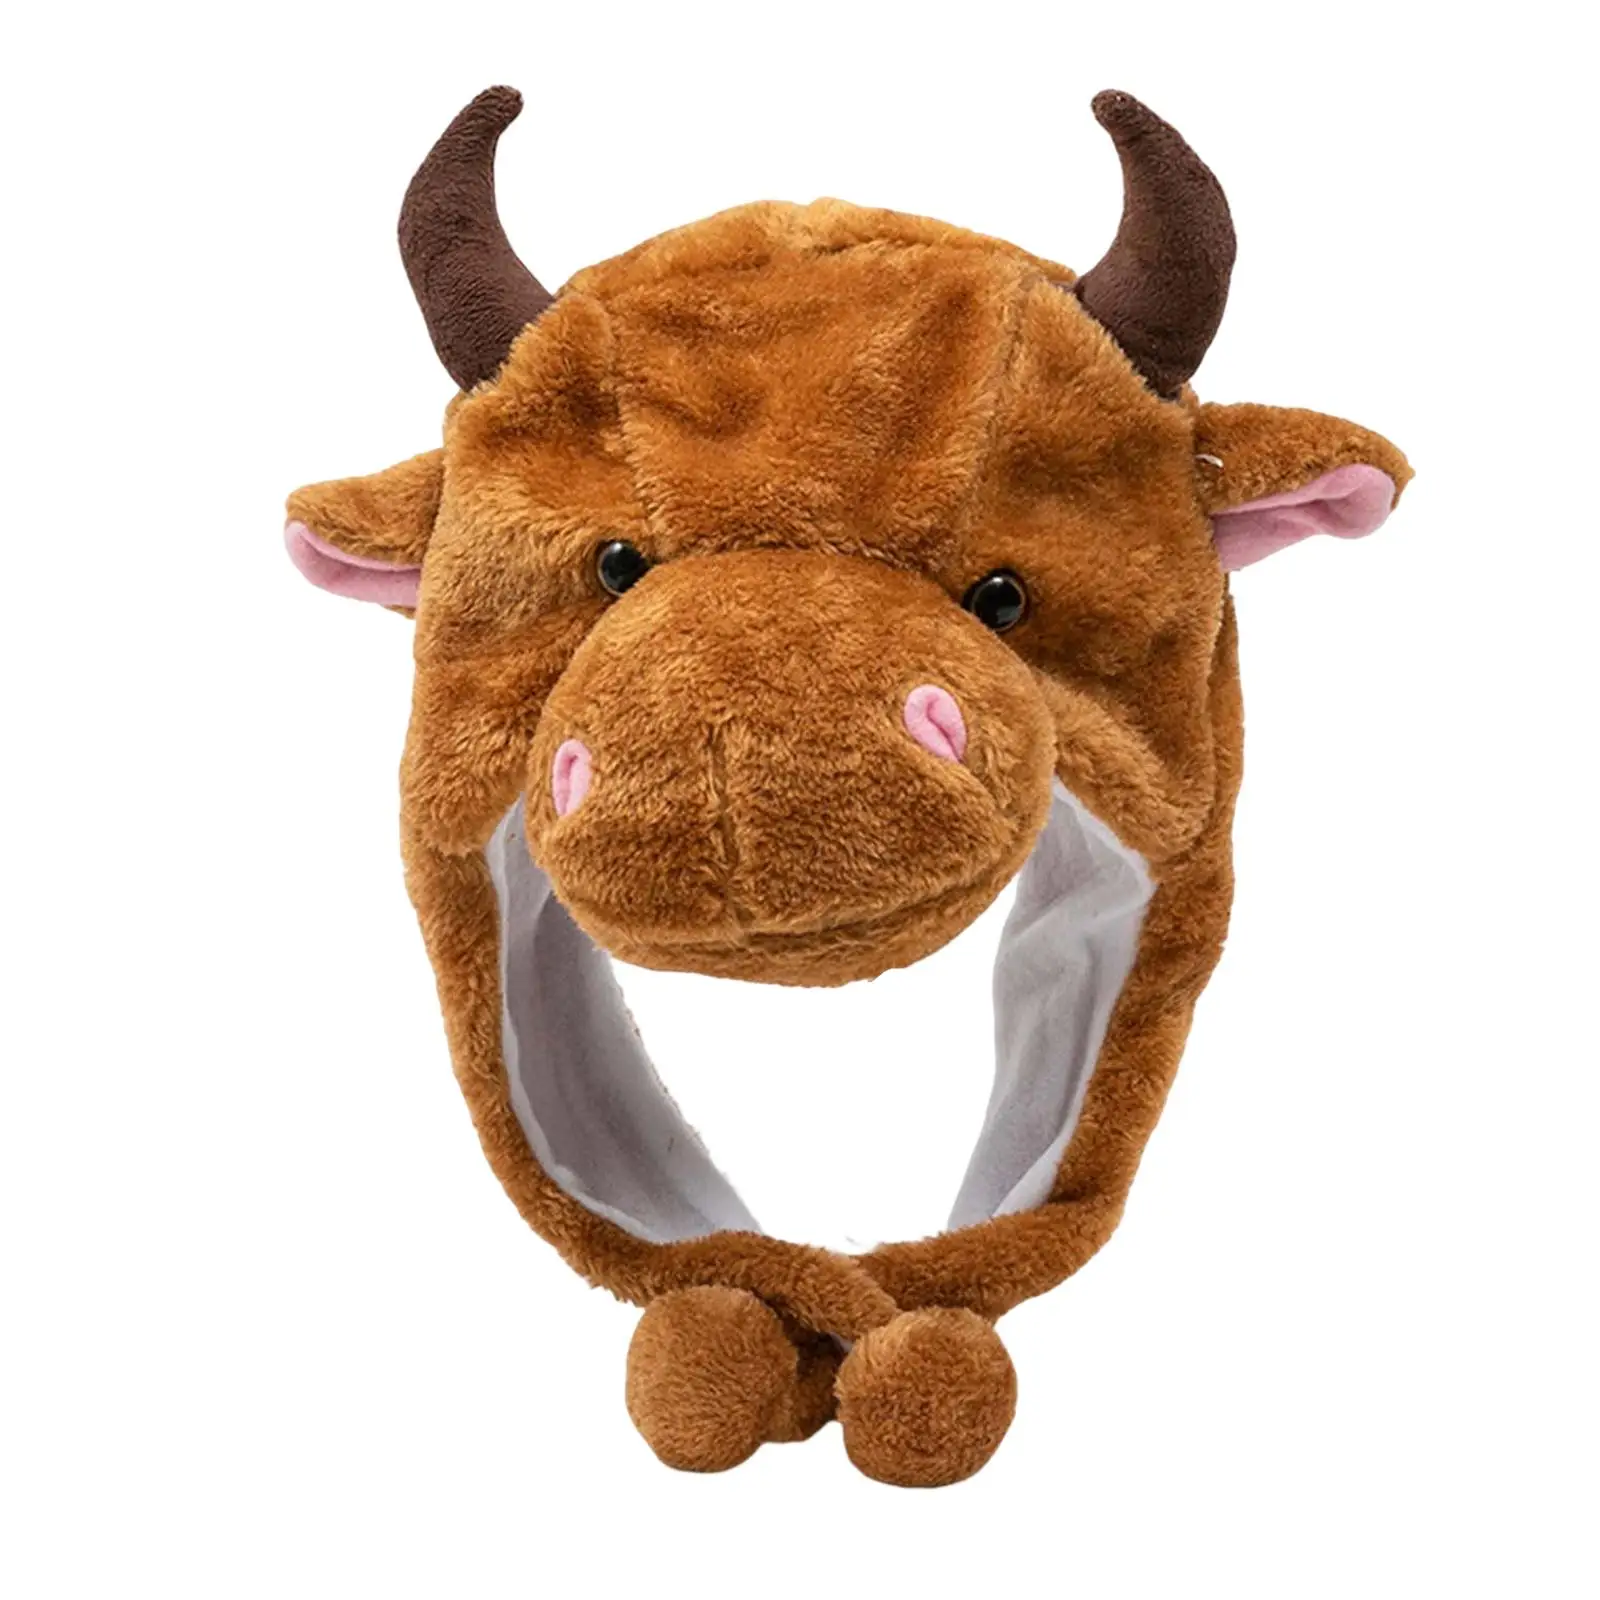 Cute Plush Animal Winter Hat Costume Fashion Cow Beanie Bull Hat Cattle Hat for Party Dress up Photo Prop Adults Kids Holiday